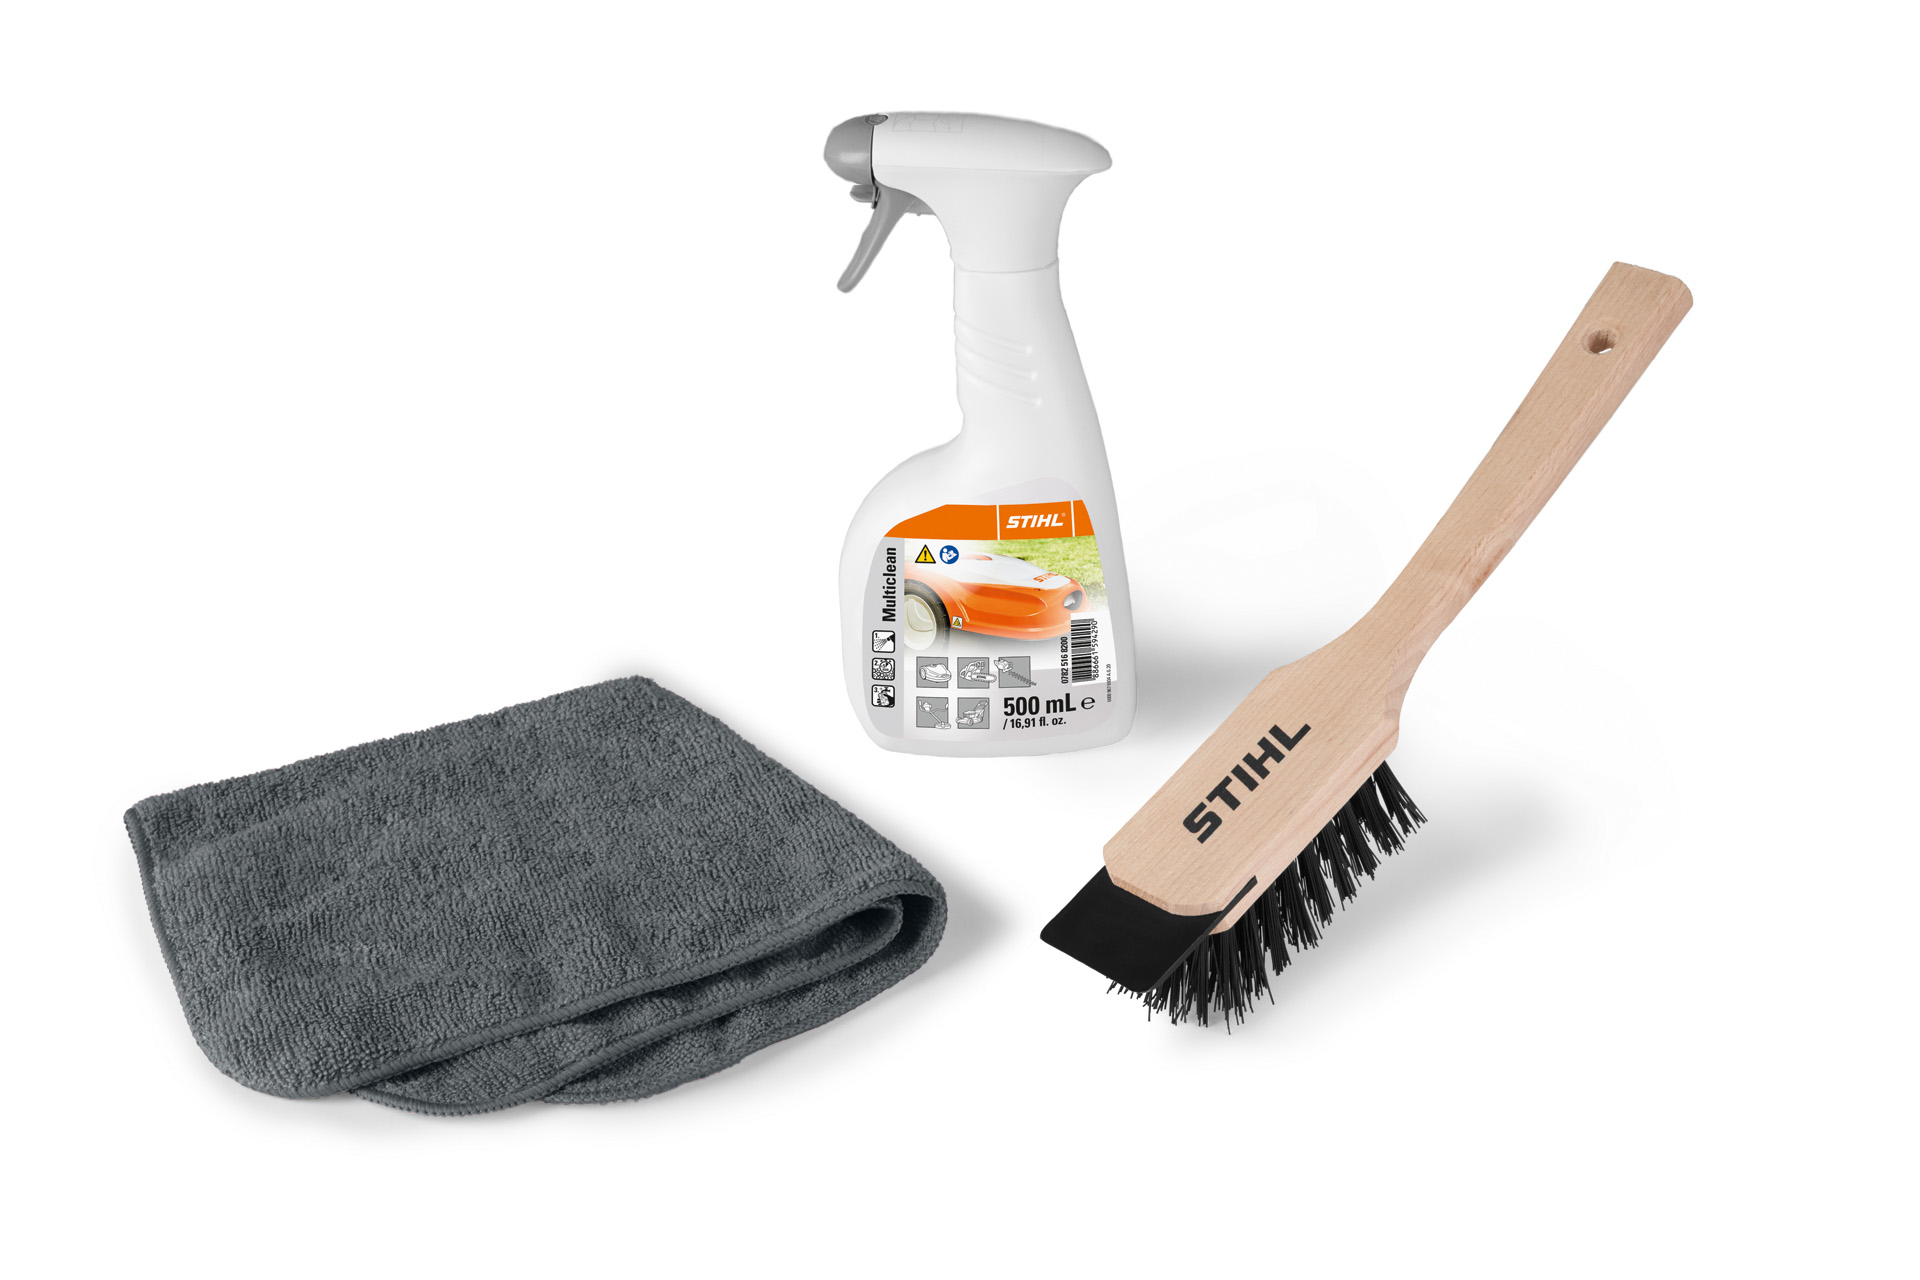 Care & Clean Kit